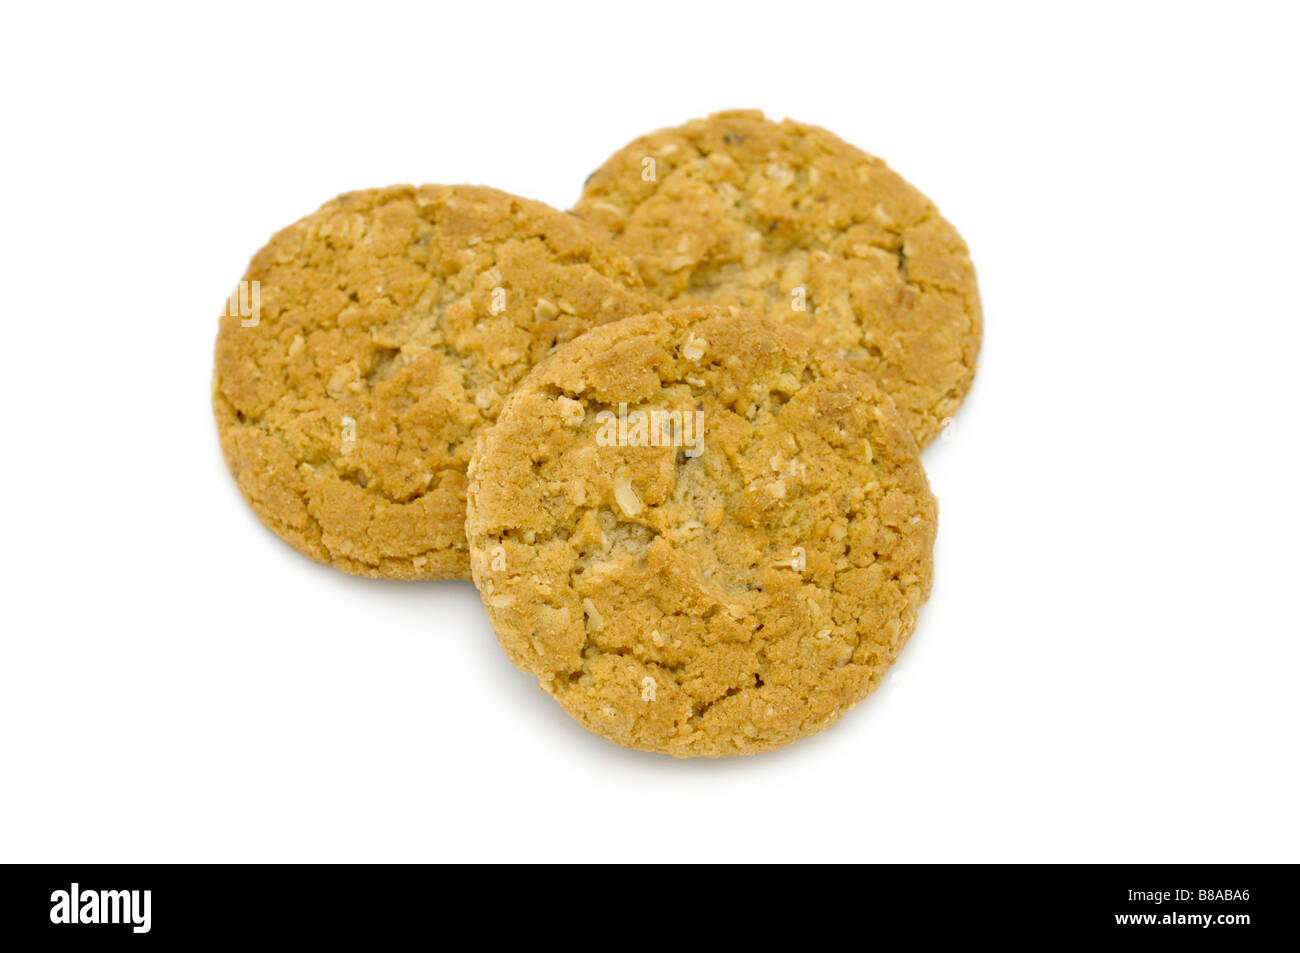 Oatmeal Cookies/Biscuits Stock Photo